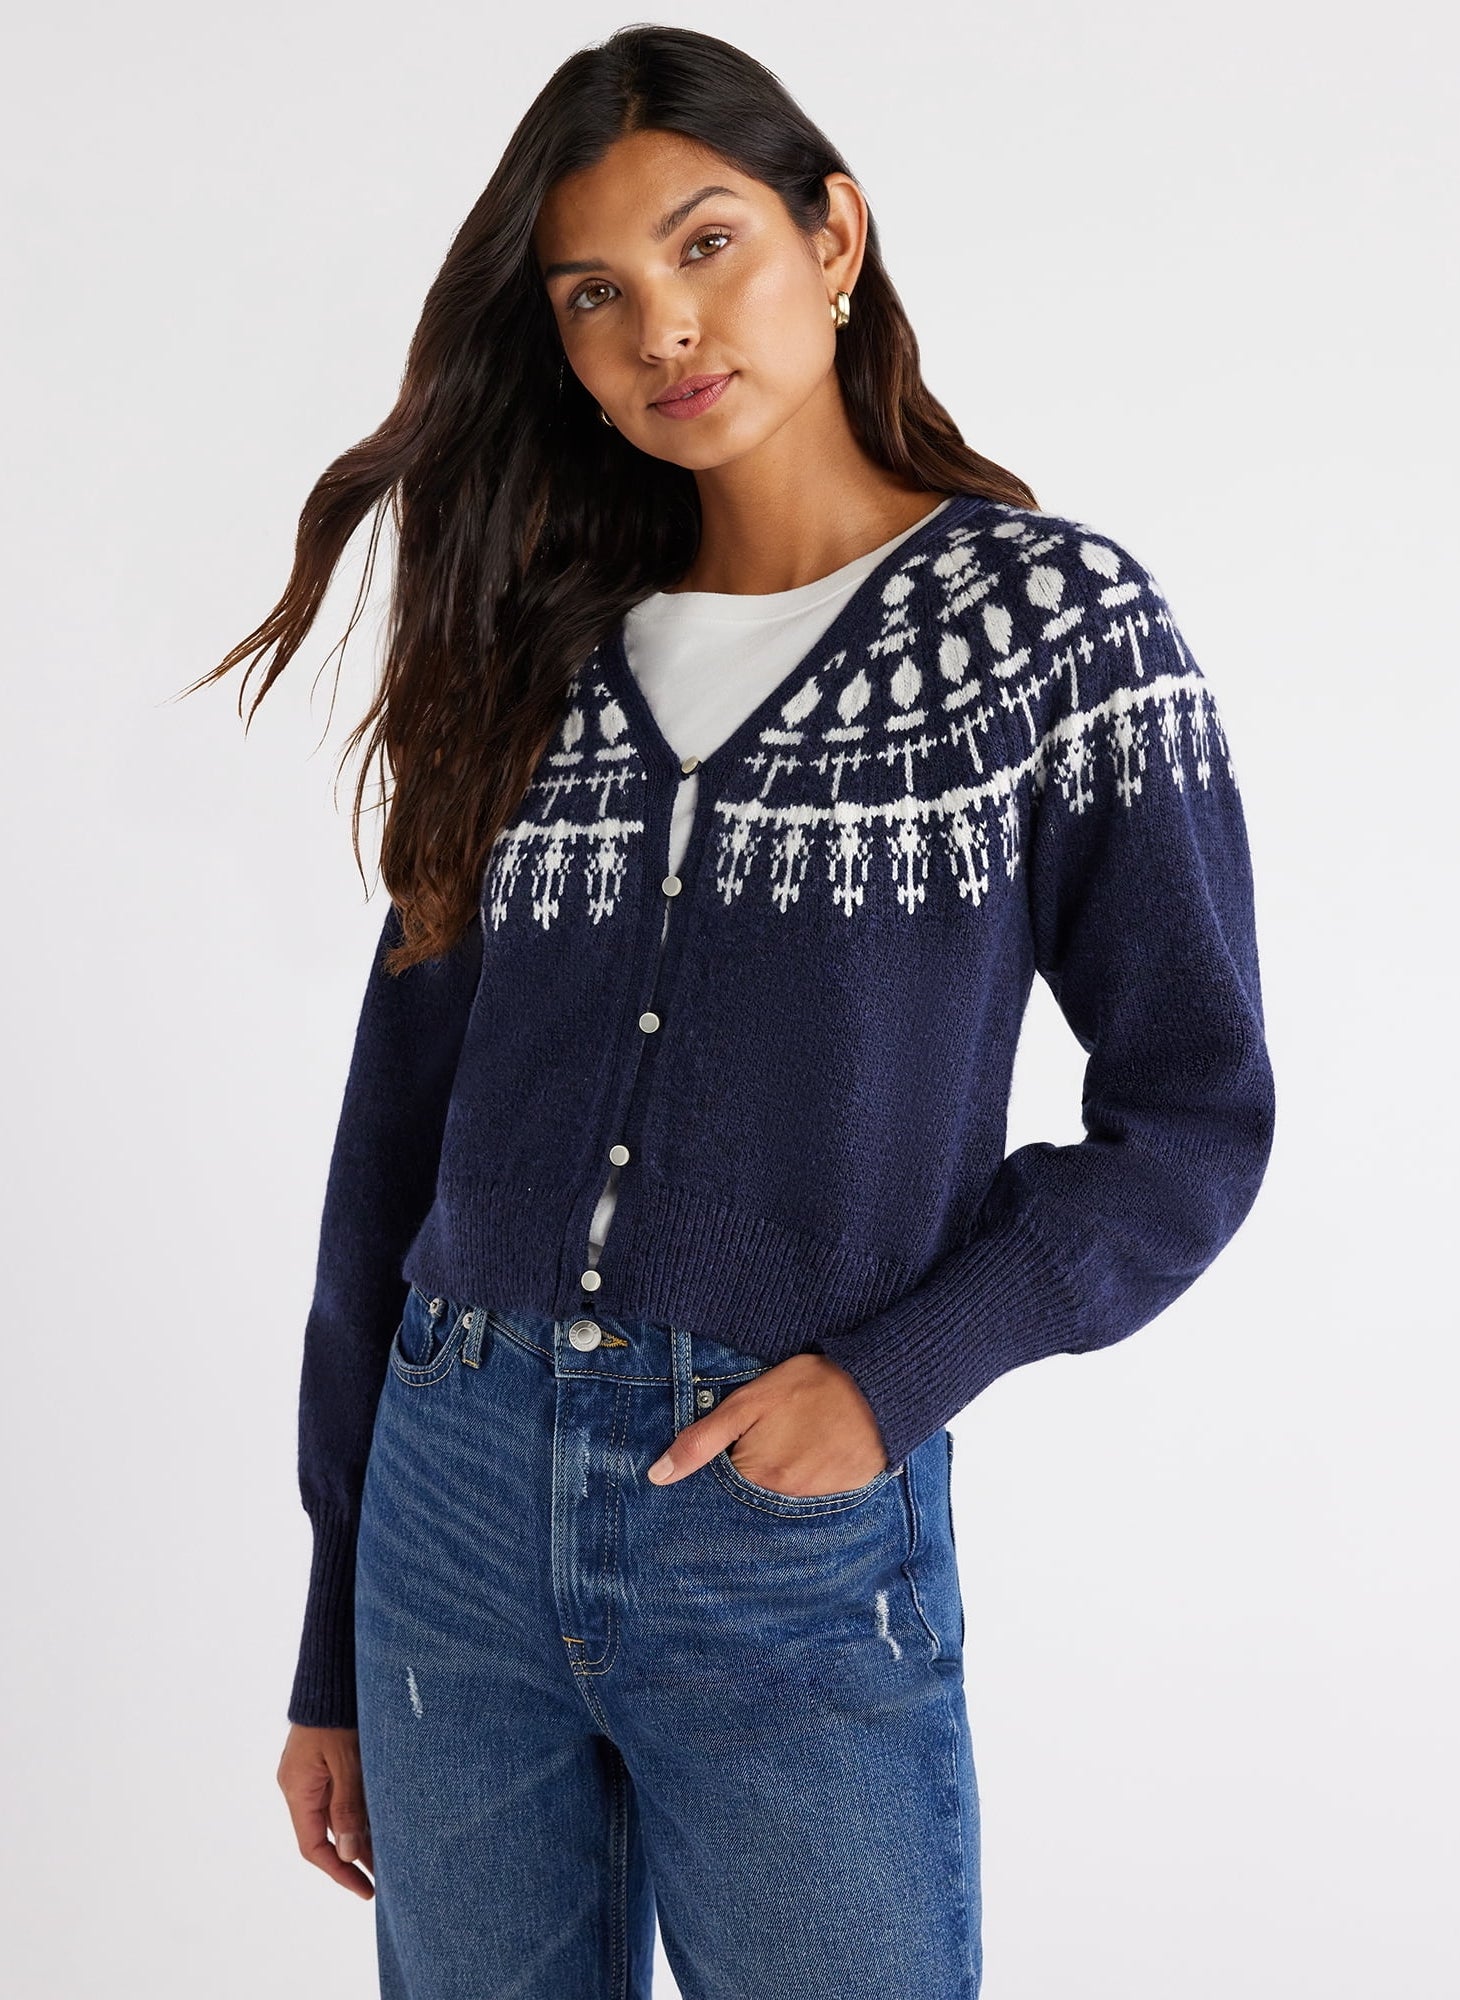 a model wearing the sweater in navy